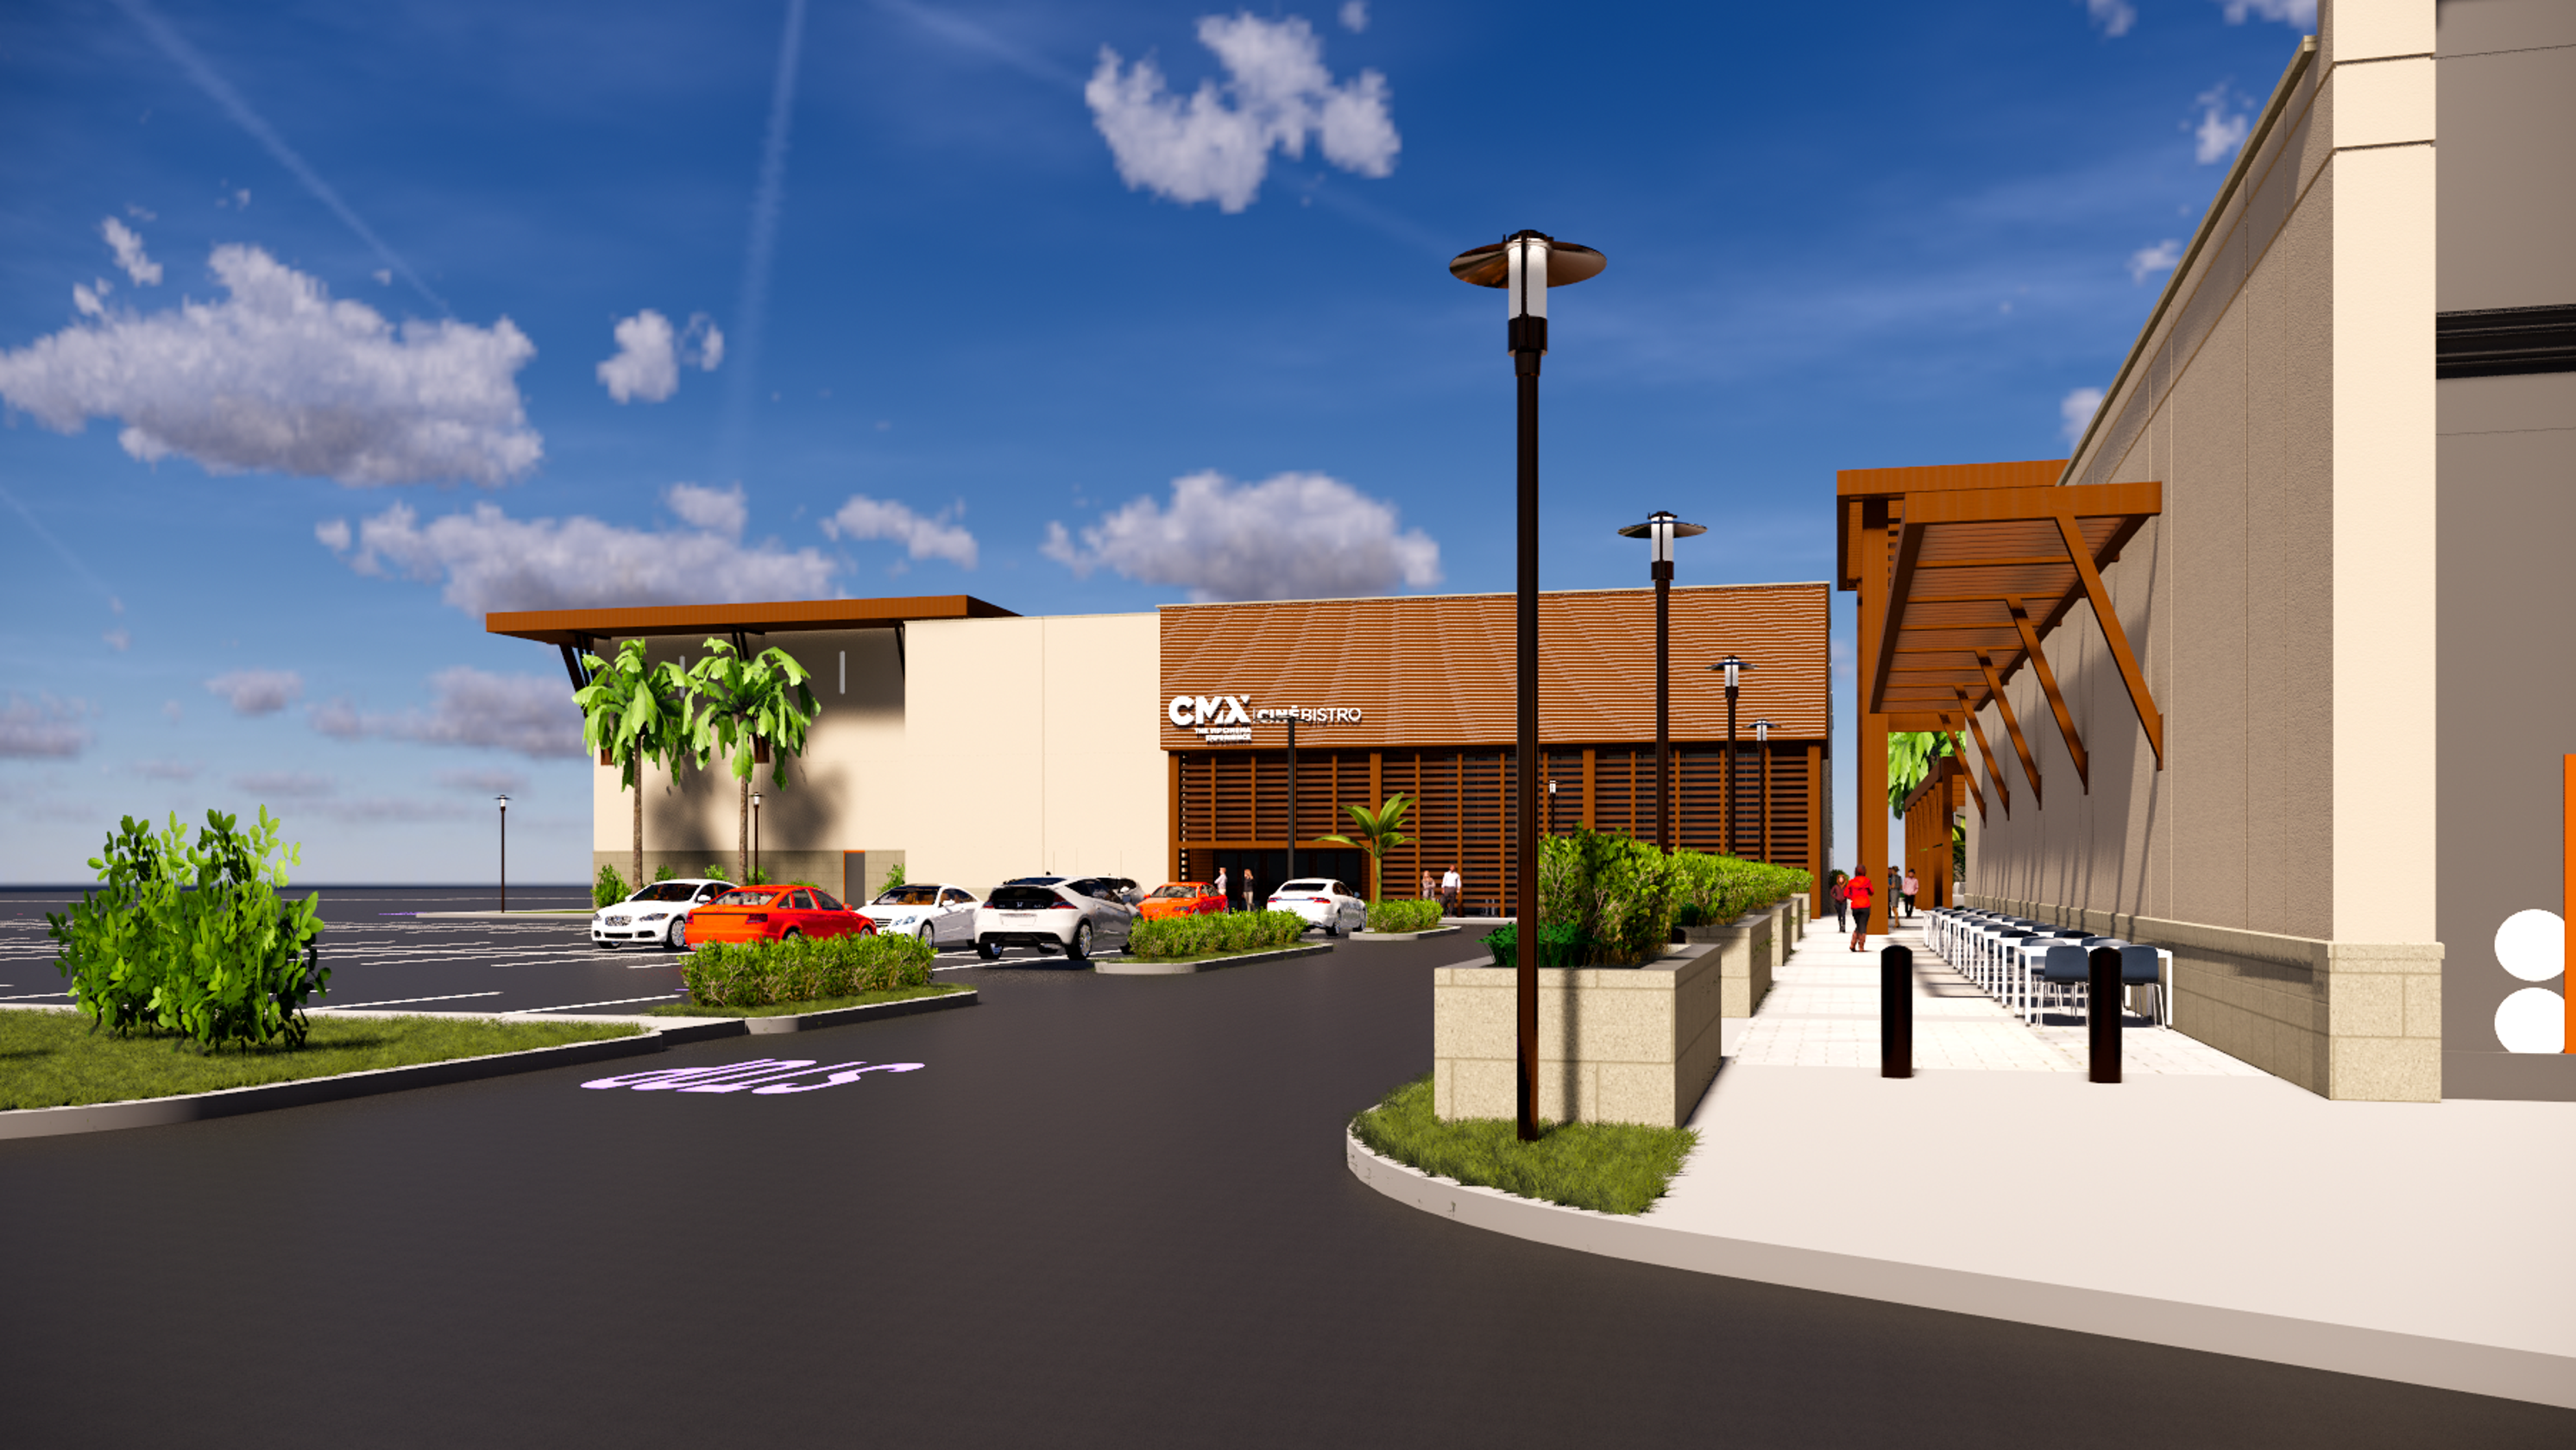 Naples Planning Board approves new luxury movie theater at Coastland Center